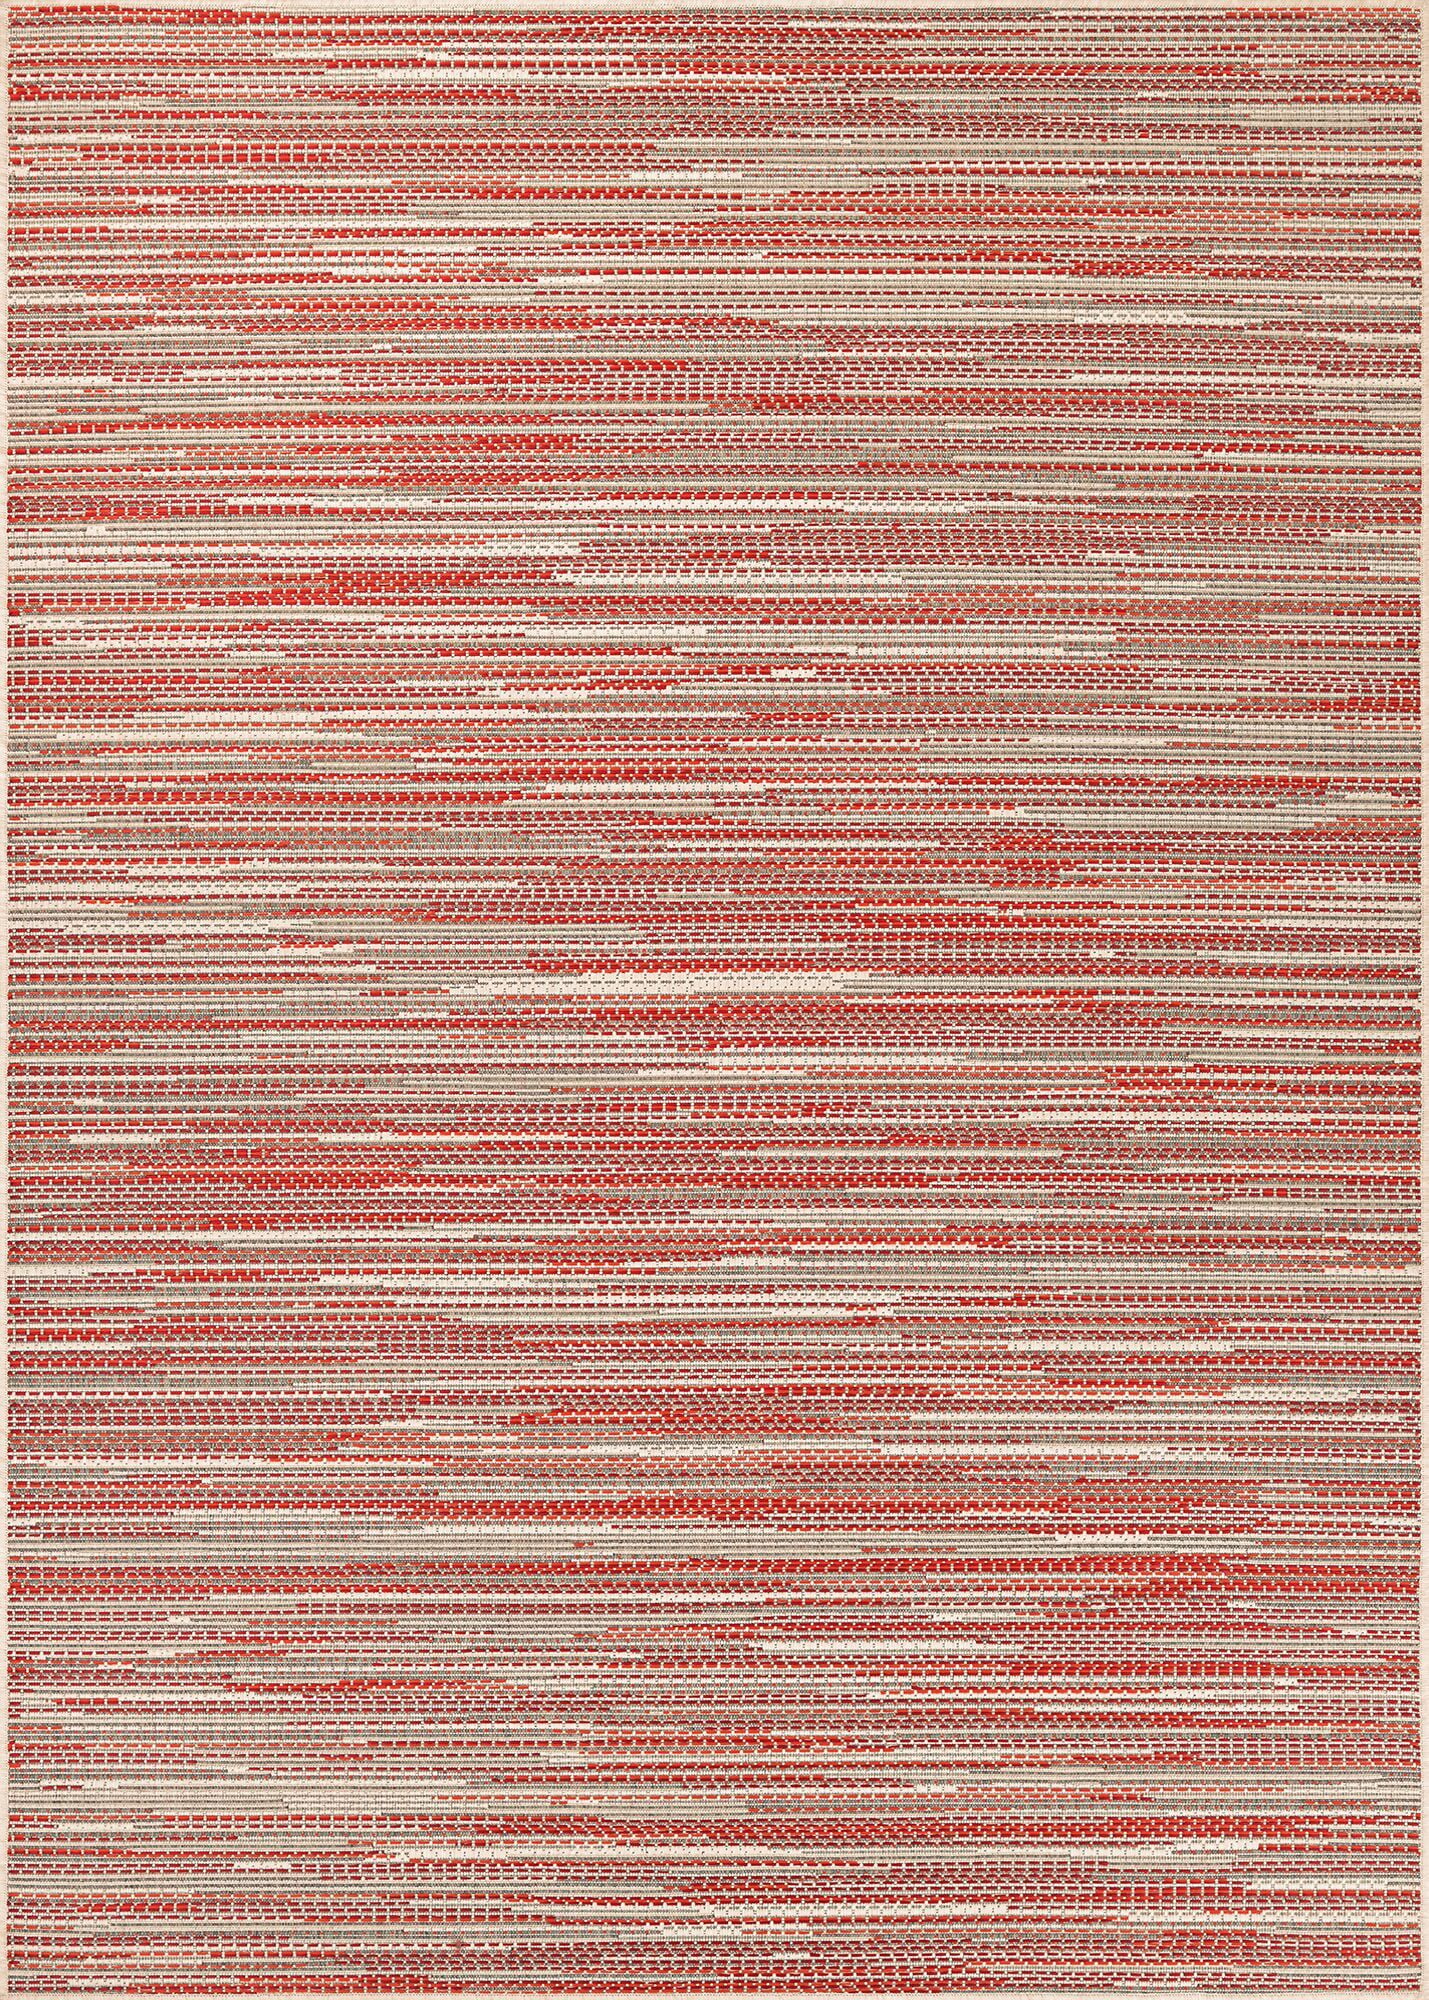 5.25' x 7.5' Red and Beige Striped Rectangular Outdoor Area Throw Rug ...